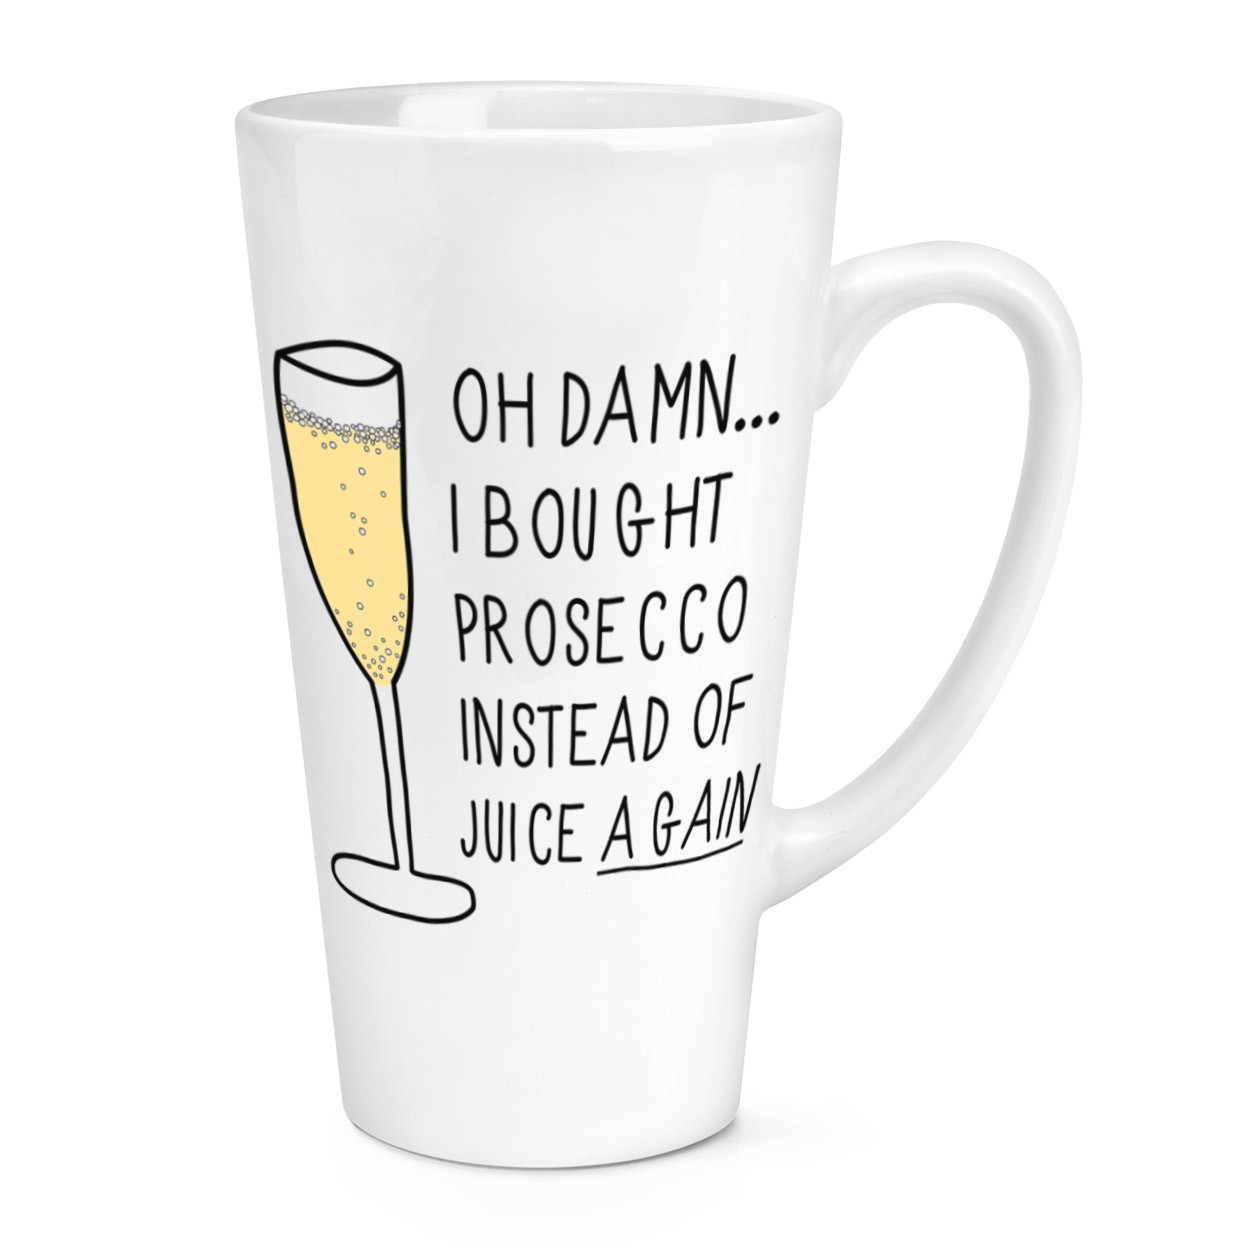 Oh Damn I Bought Prosecco Instead Of Juice Again 17oz Large Latte Mug Cup